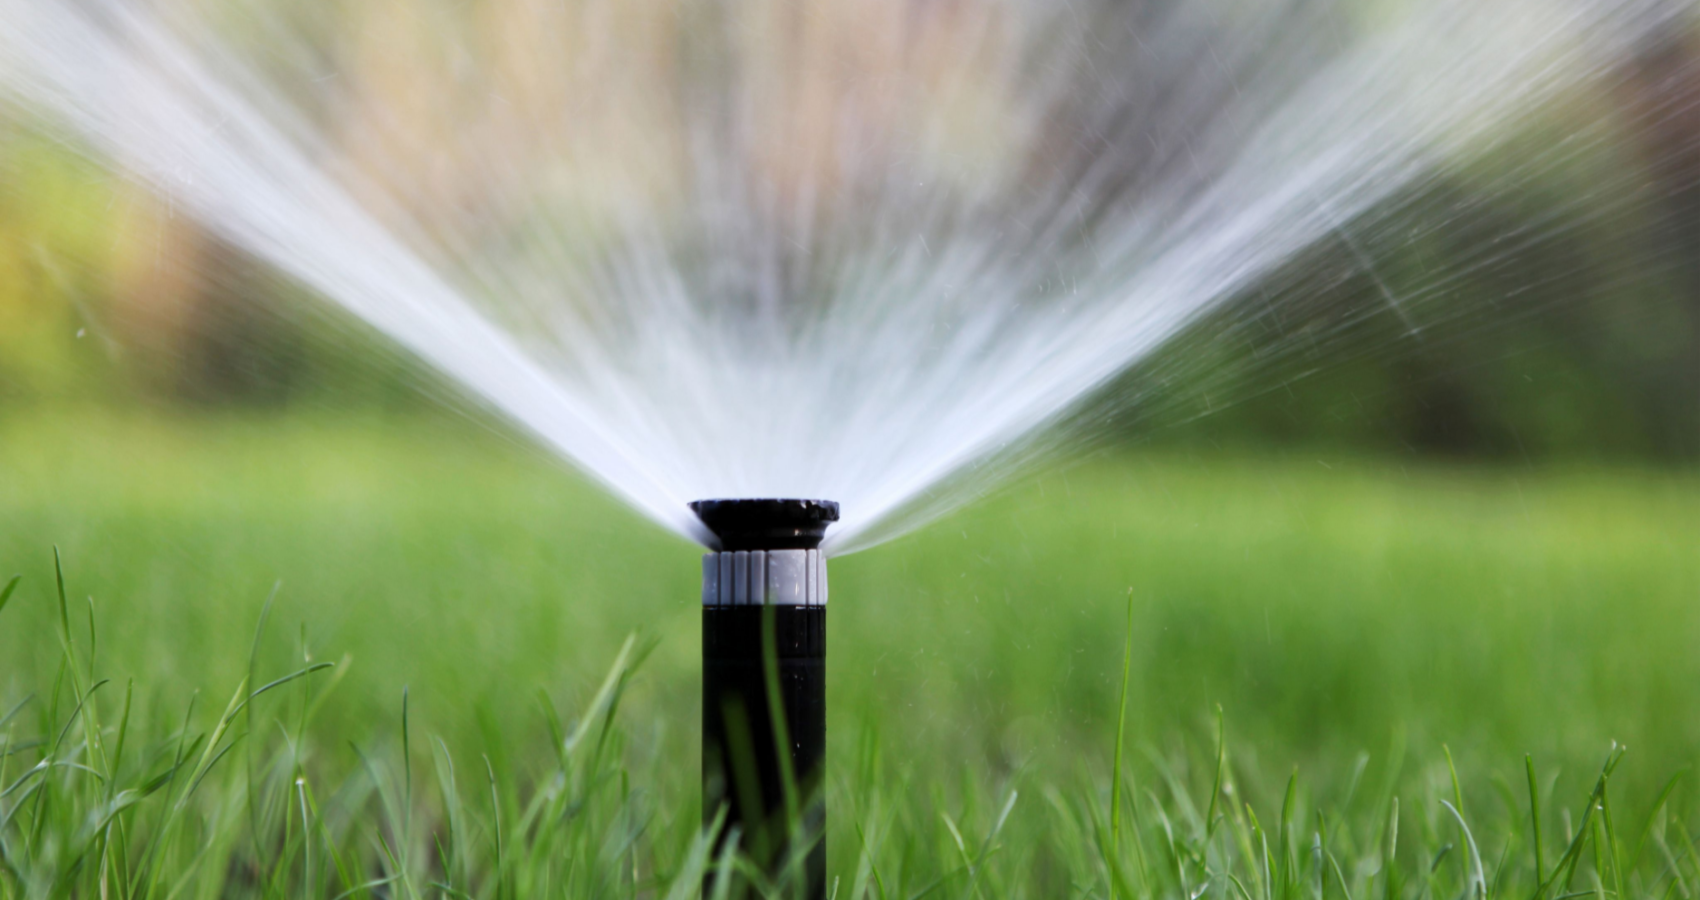 Sprinkler System Installation Clayton, MO | Lawn Care for Clayton, MO Area | Lawn Sprinklers of St. Louis